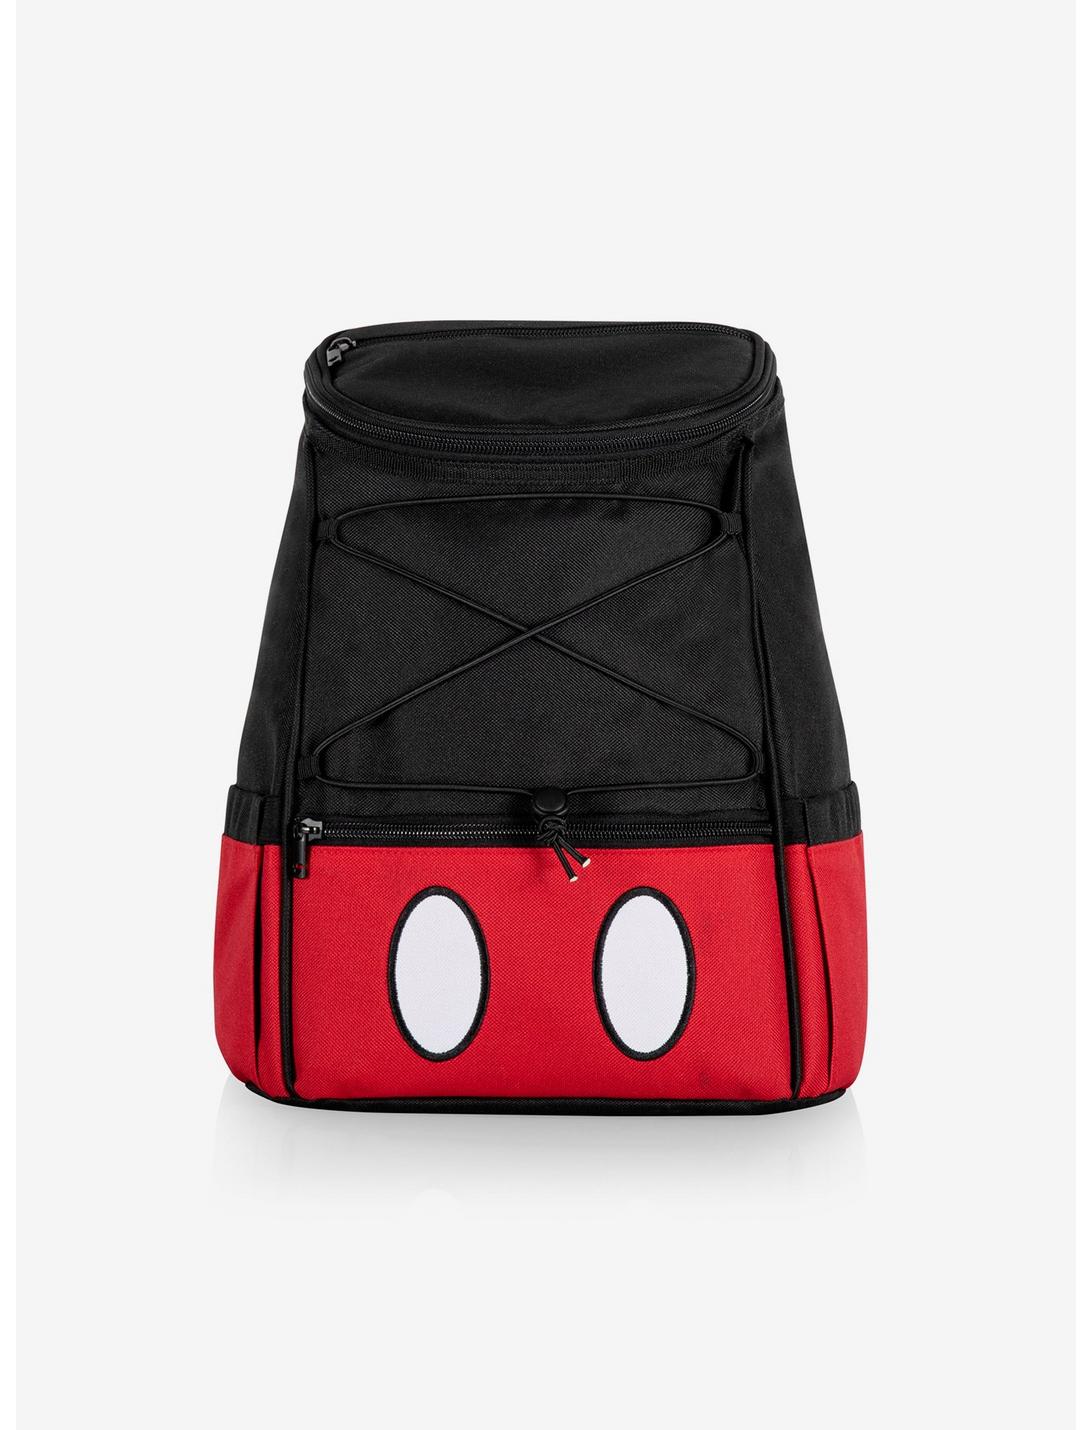 Disney Mickey Mouse Classic Mickey Shorts PTX Cooler Backpack, , hi-res